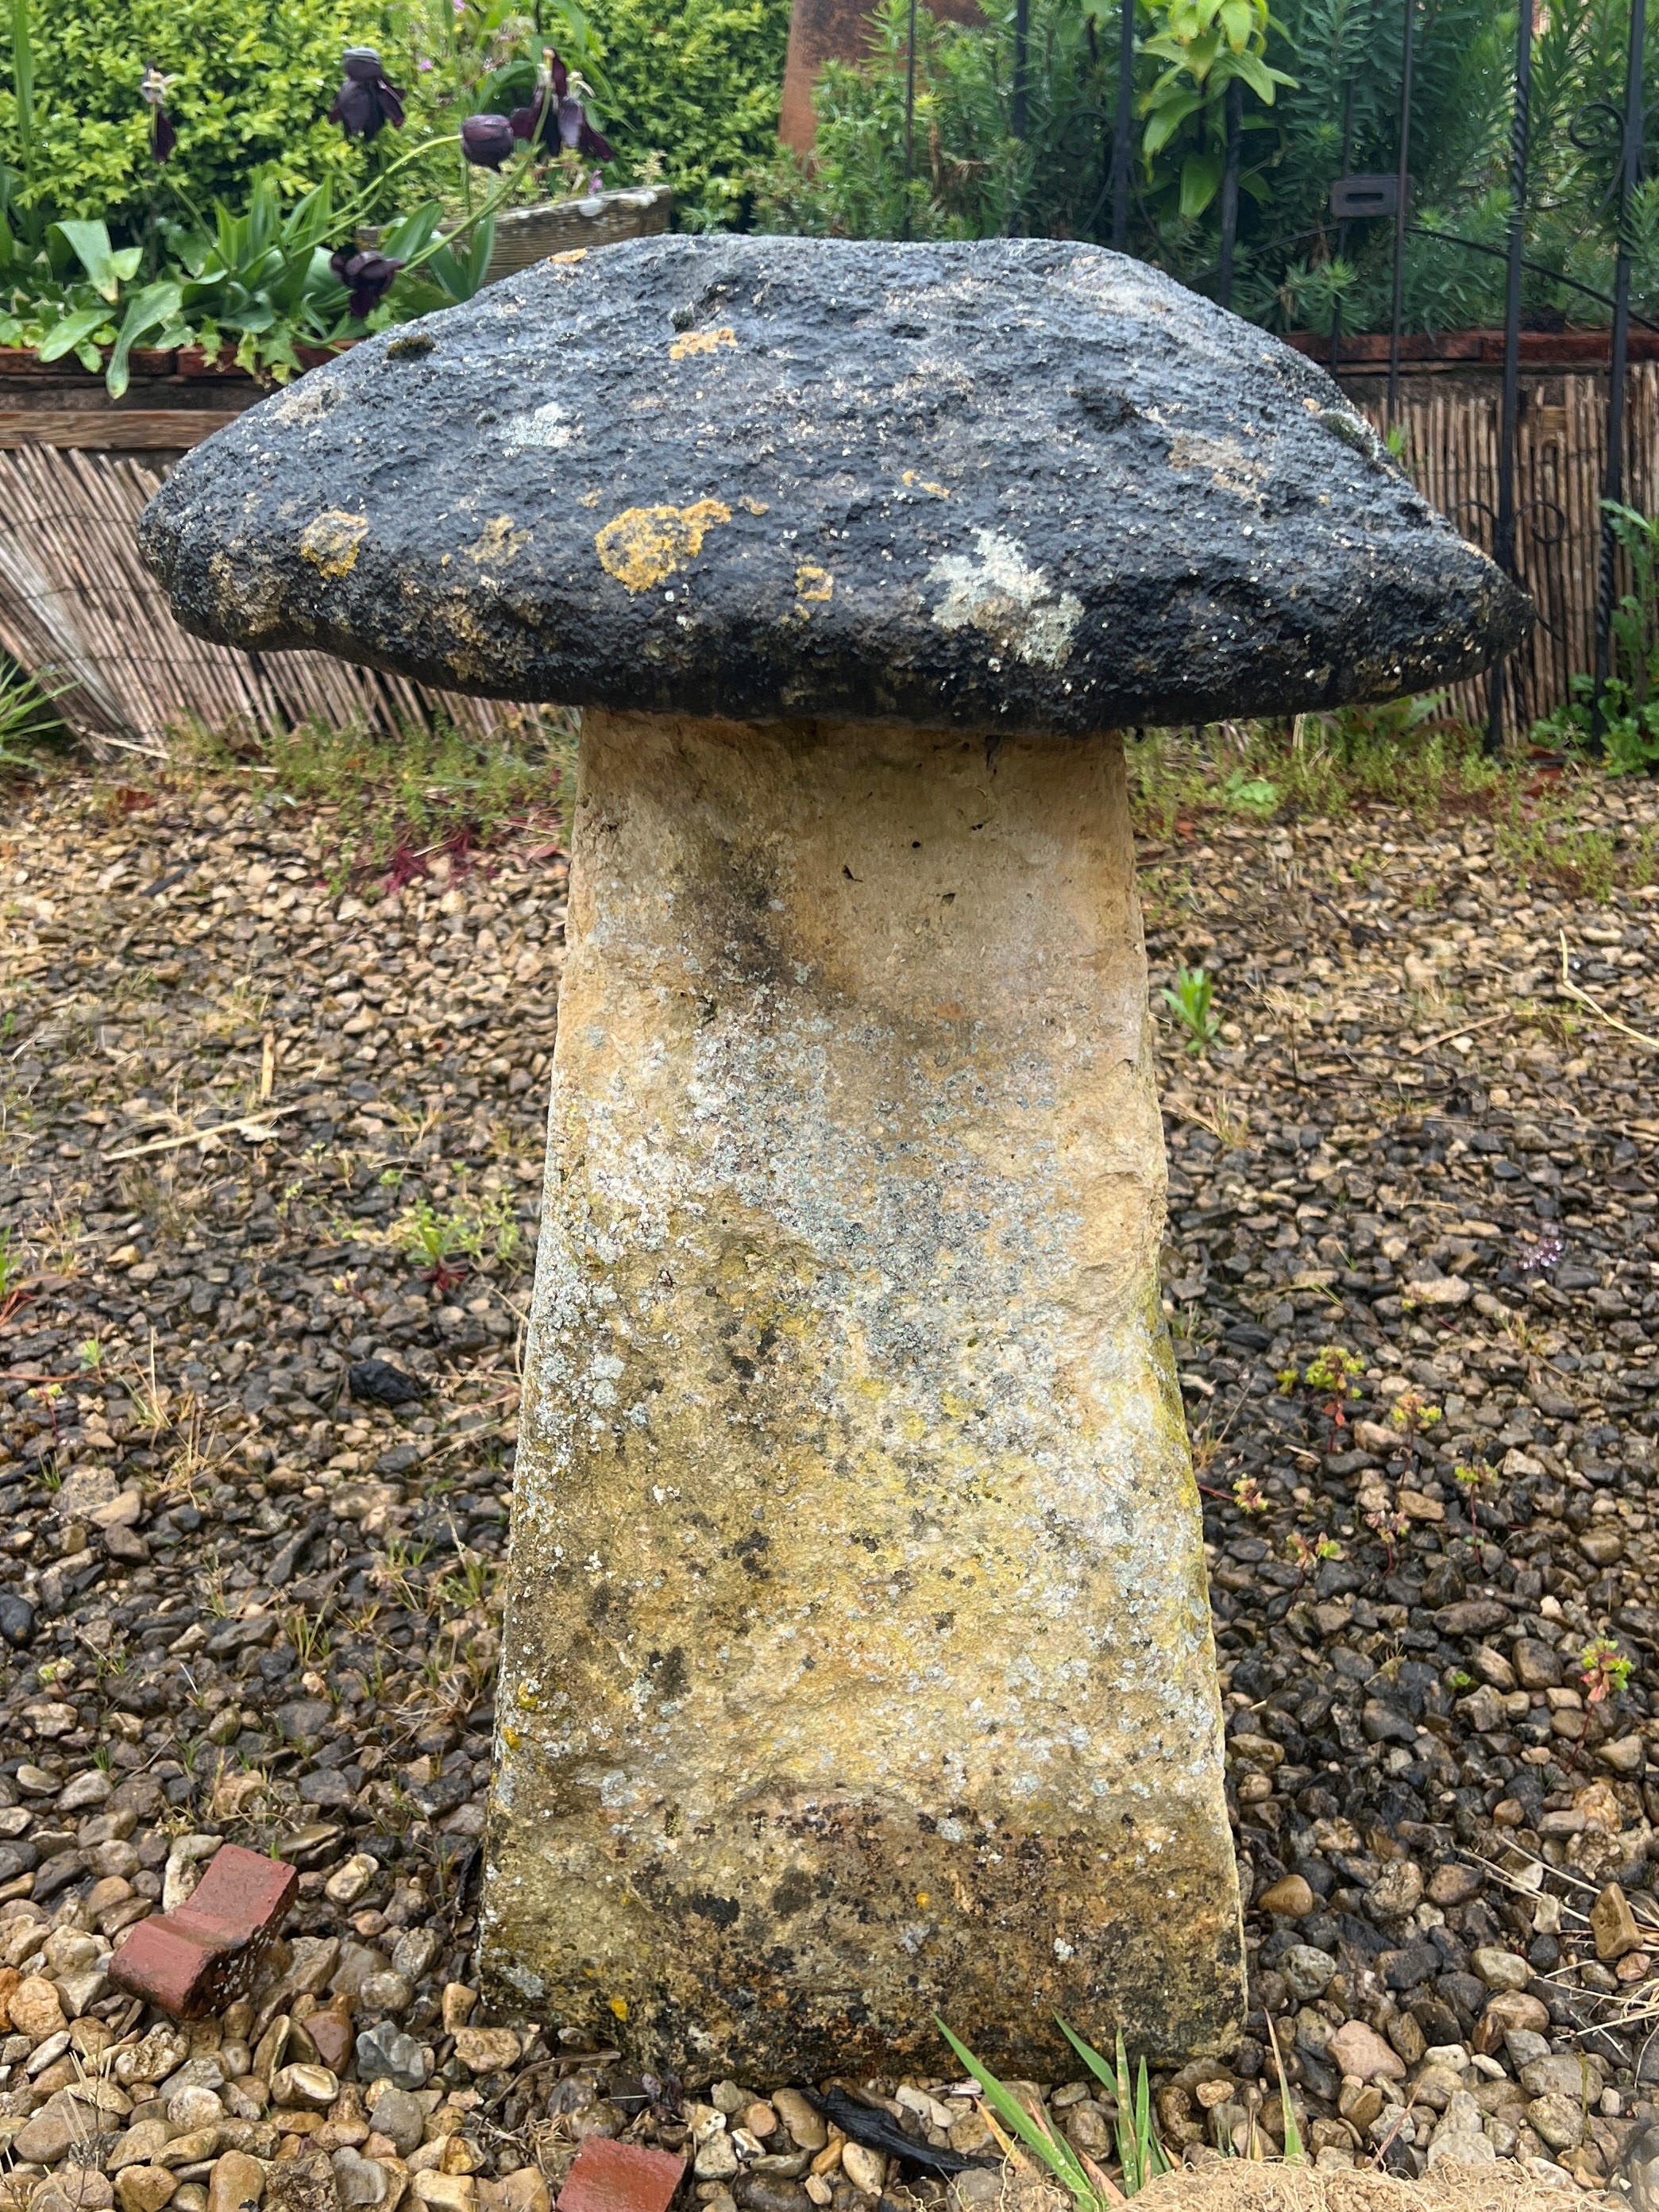 A Cotswold stone staddle stone - the top 51cm diameter, 58cm high.